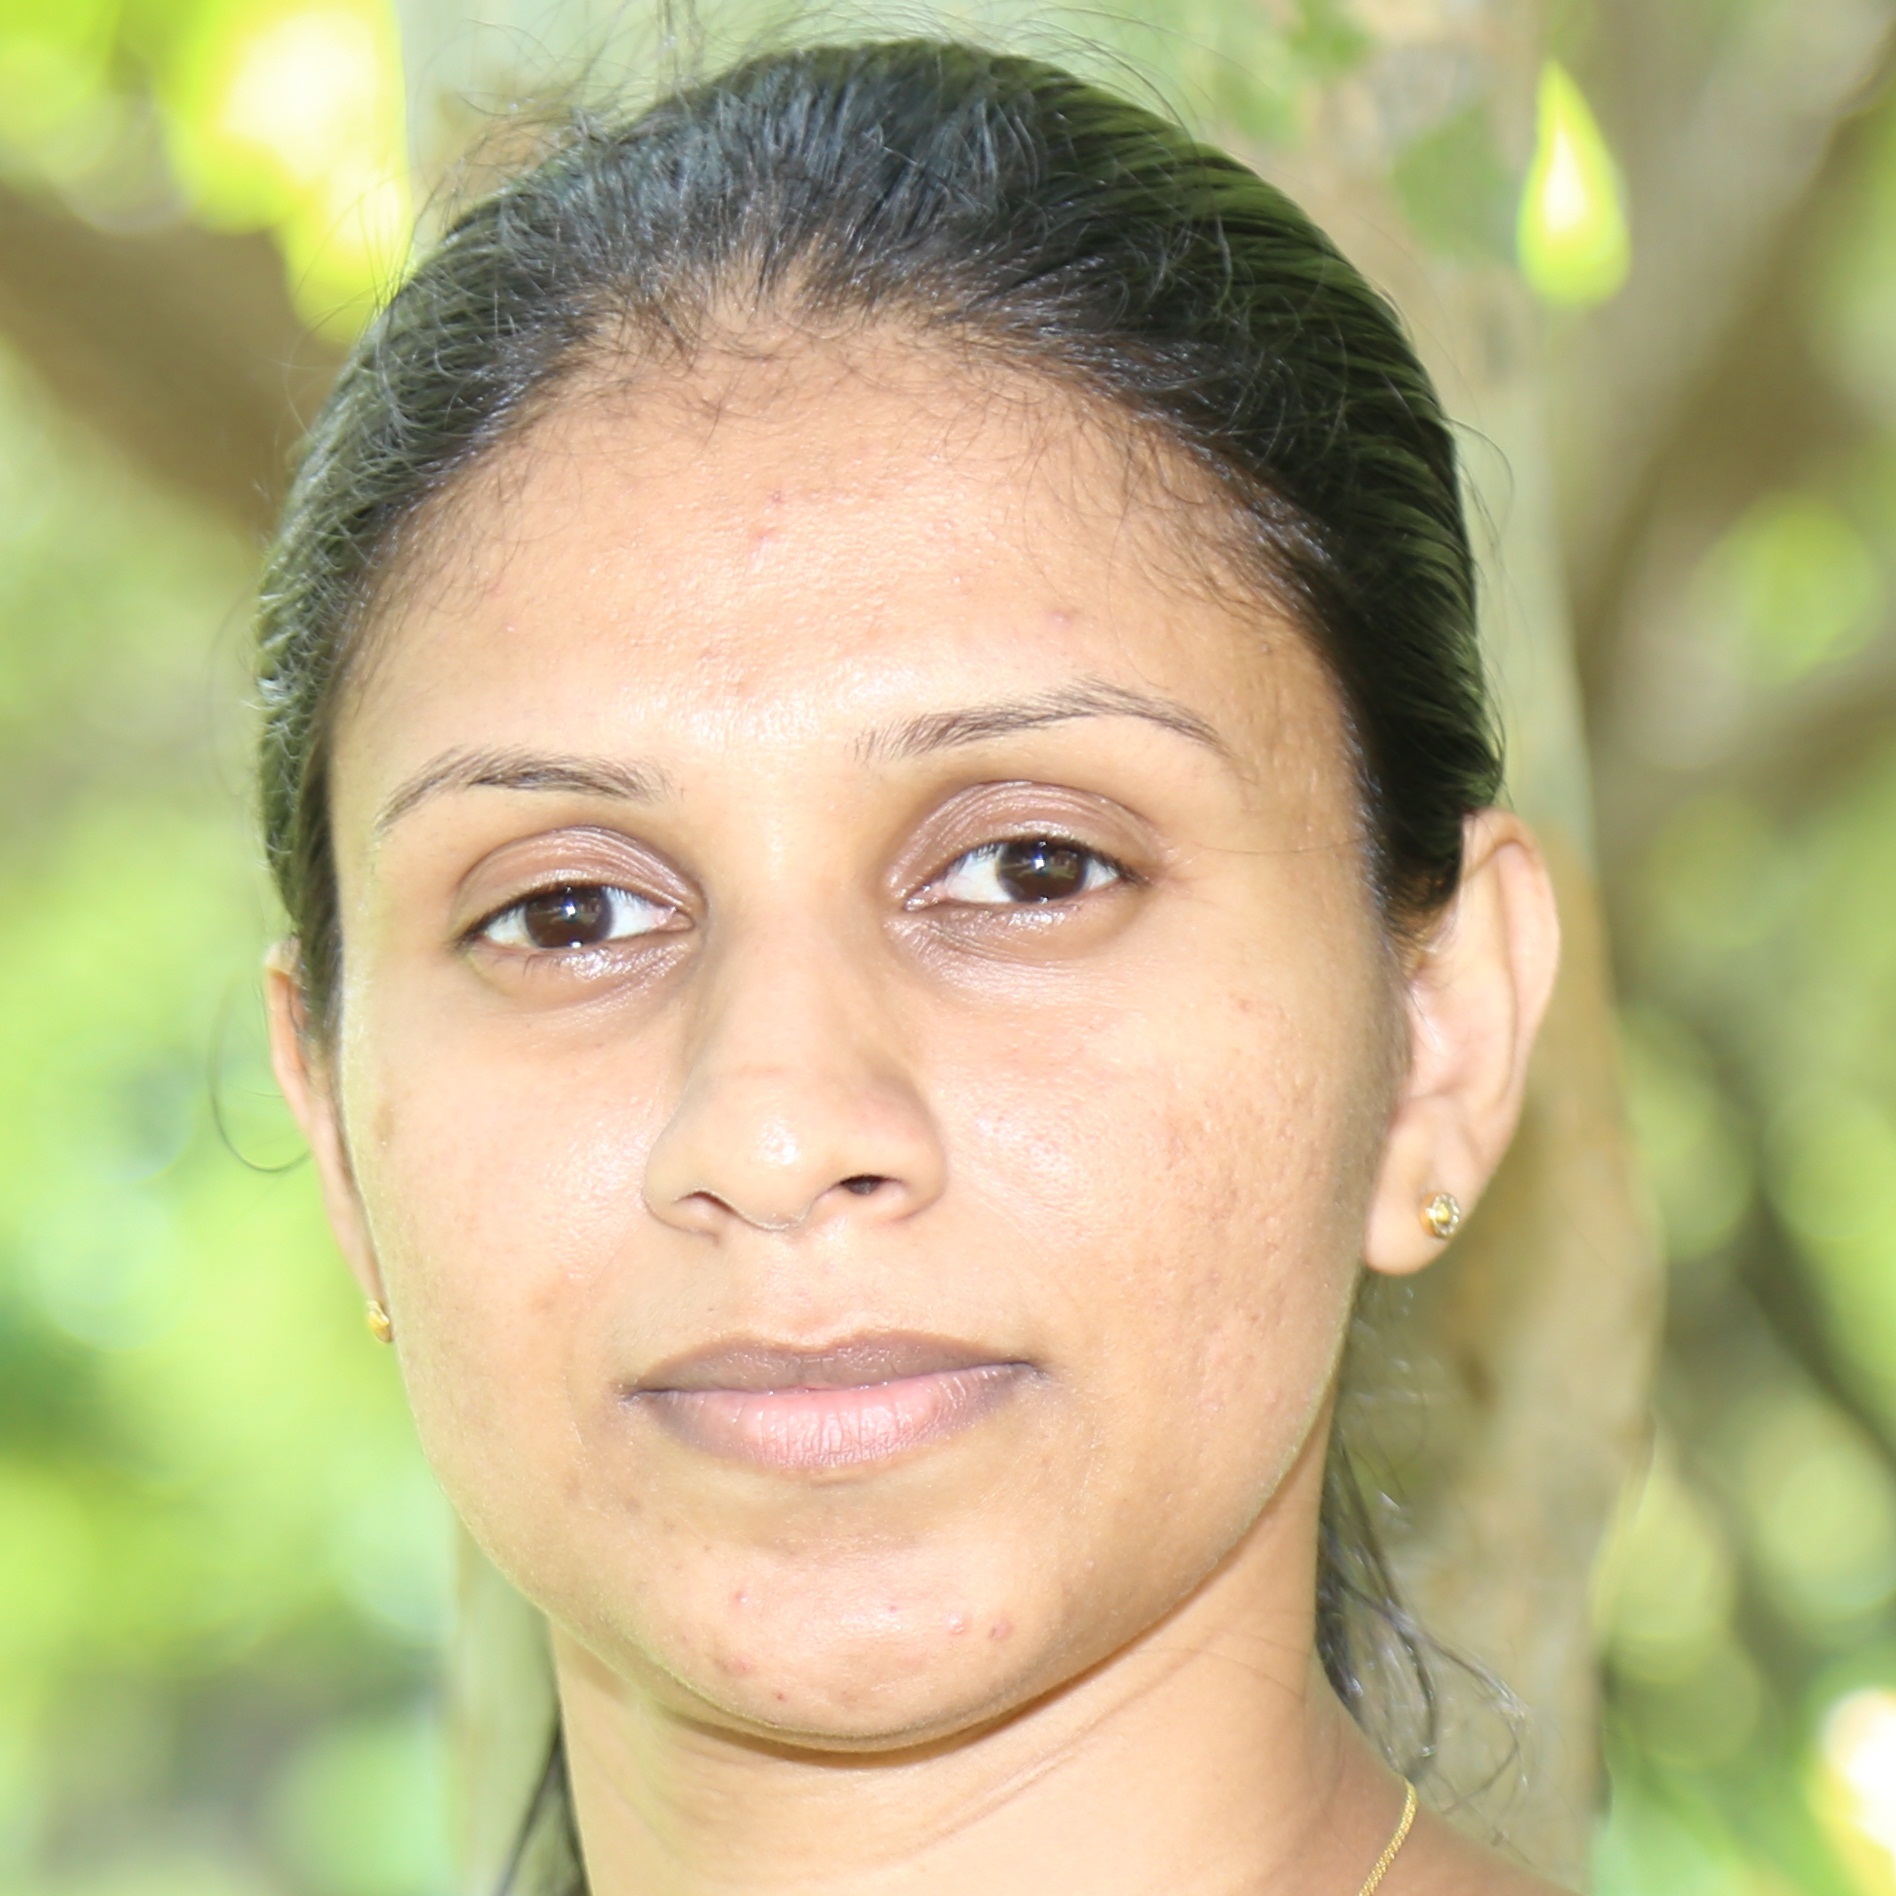 Ms. Nayomi Dissanayake – Faculty of Applied Sciences